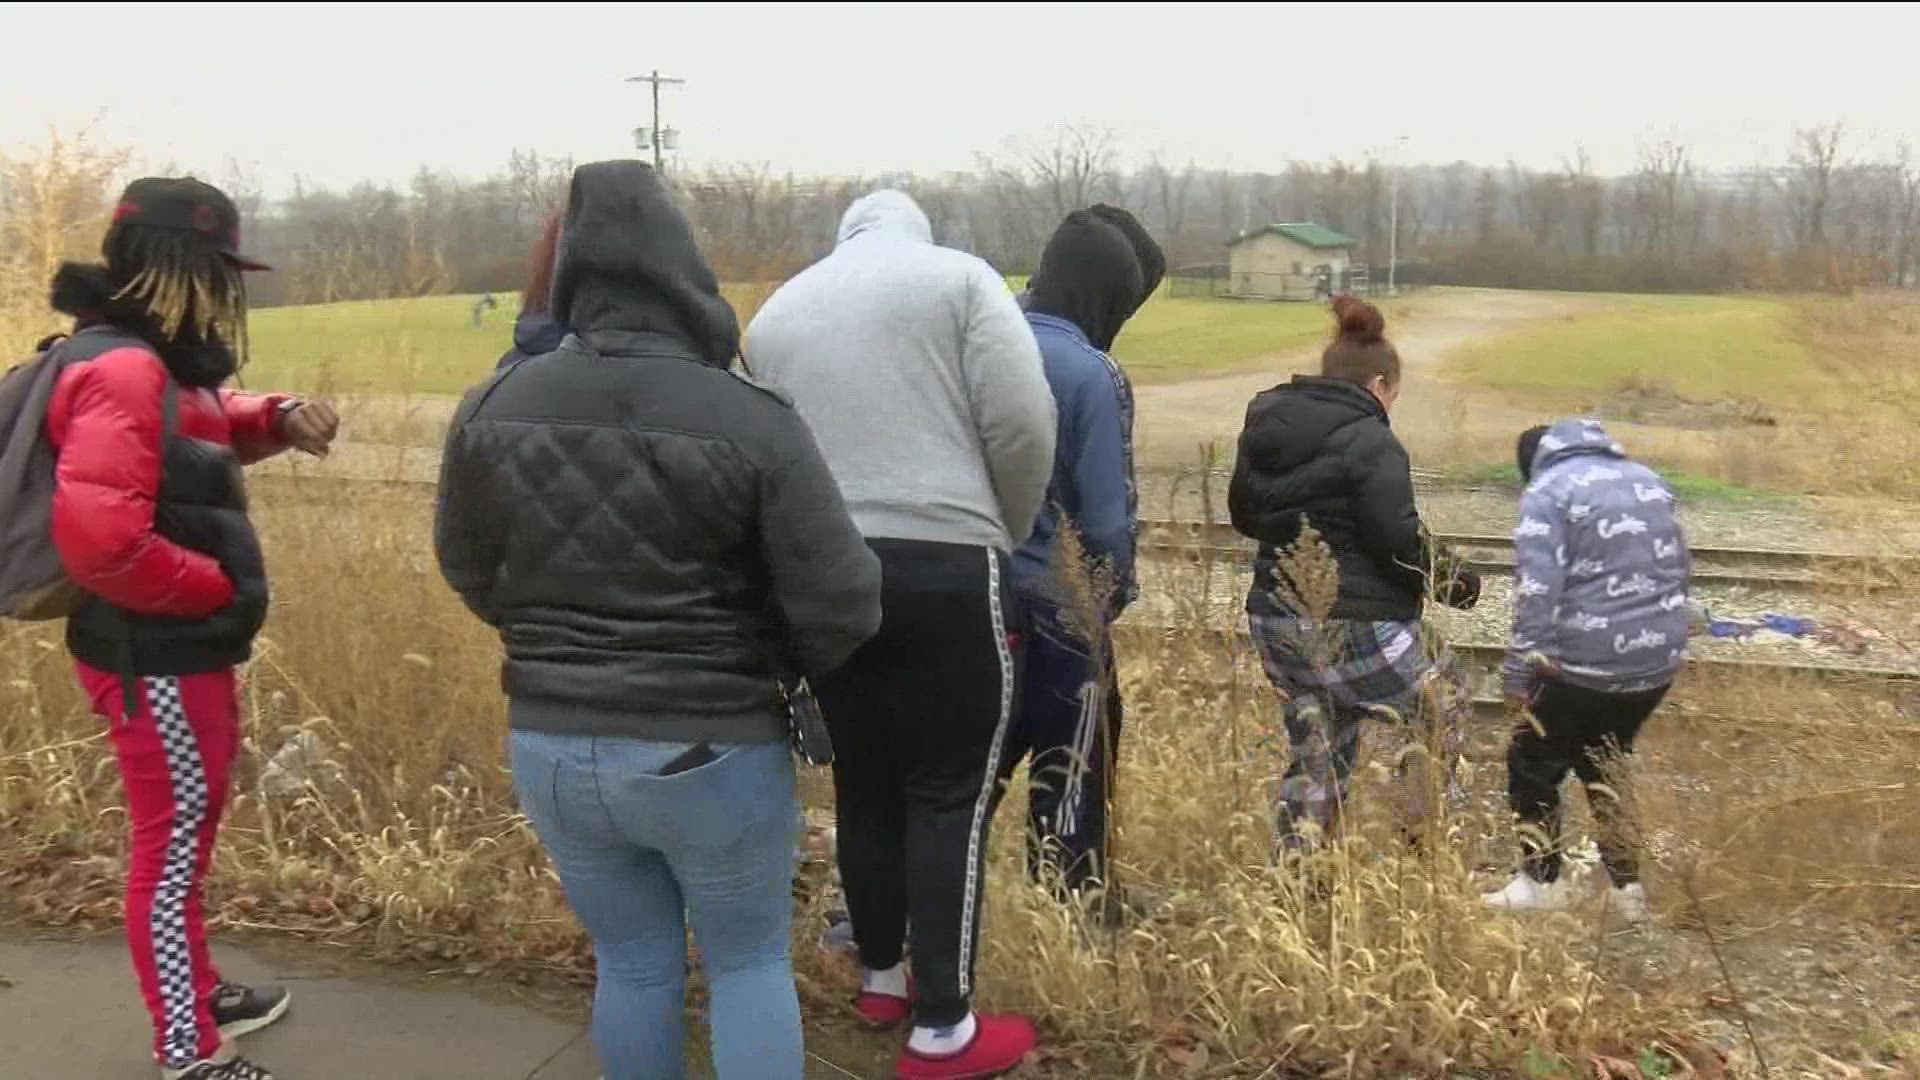 The teens went missing Saturday and family members are searching for them.